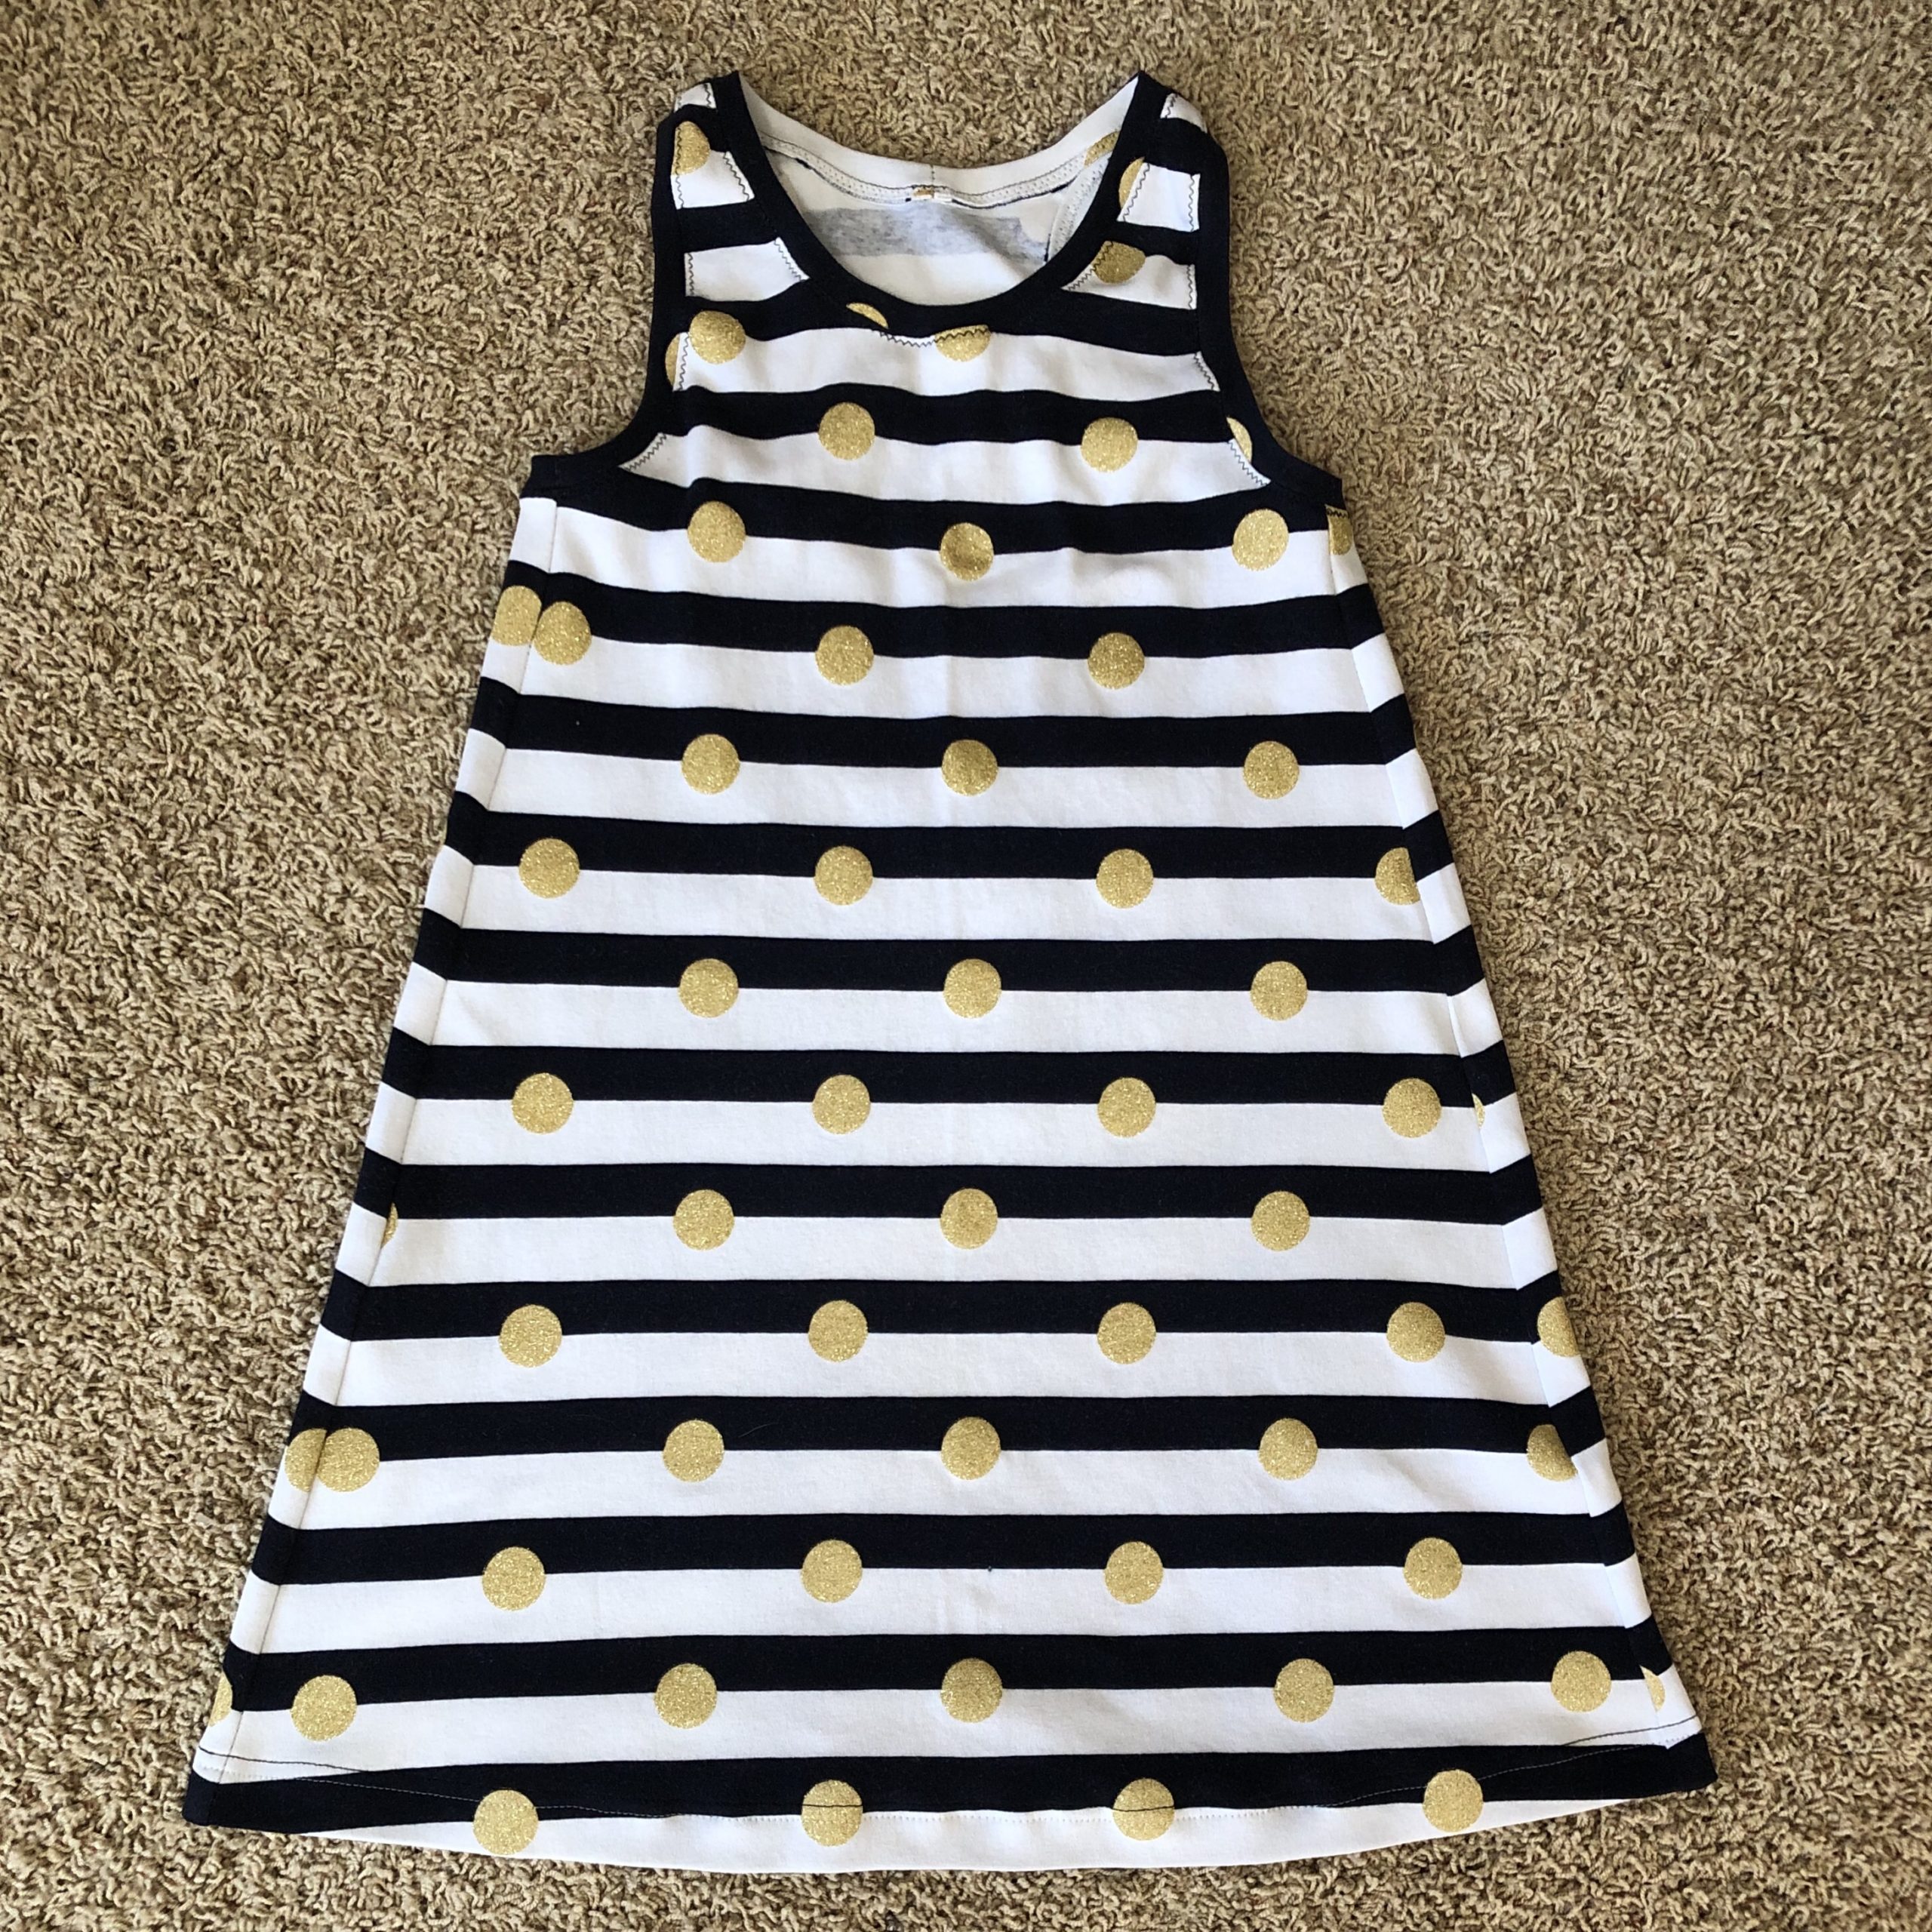 BUMBLE BABY TODDLER GIRL'S SOLID WHITE SLEEVELESS SHIFT DRESS LIGHTWEIGHT COTTON 